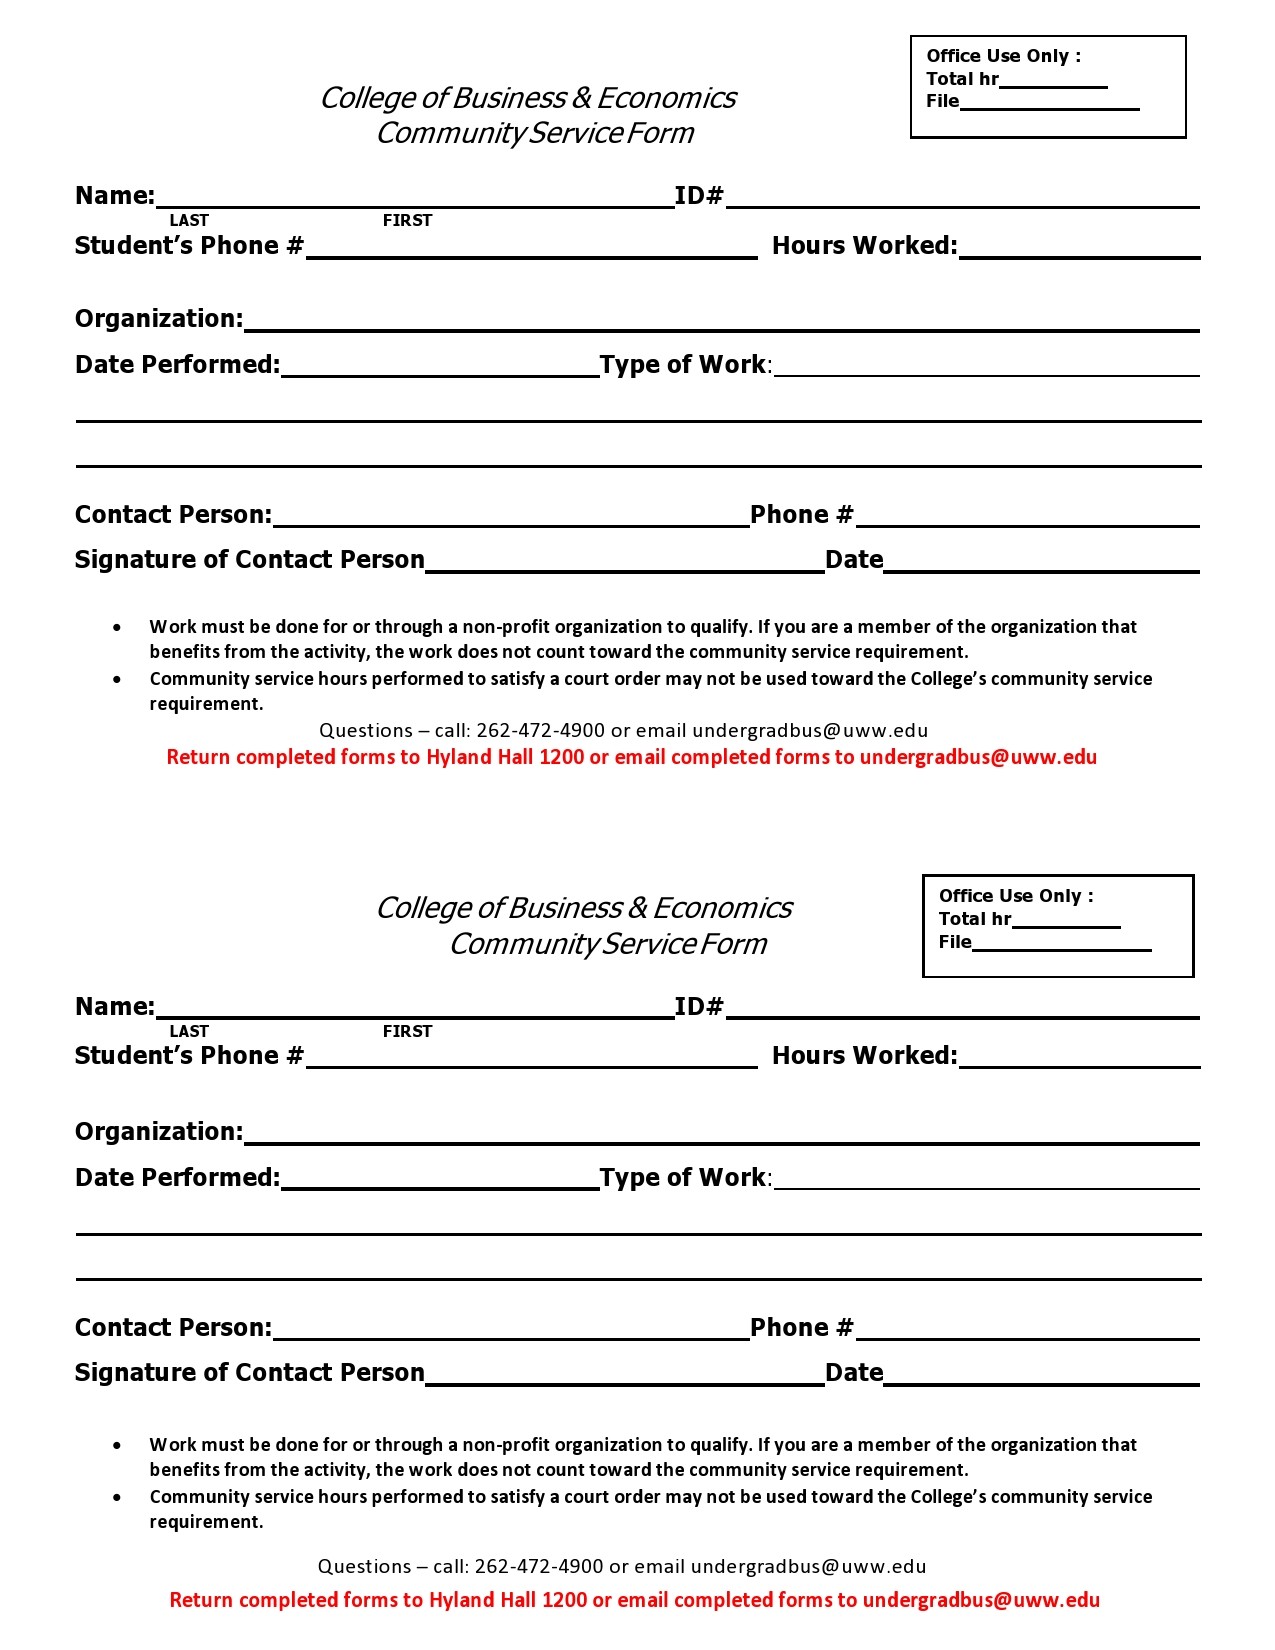 printable-community-service-form-tn-promise-printable-forms-free-online